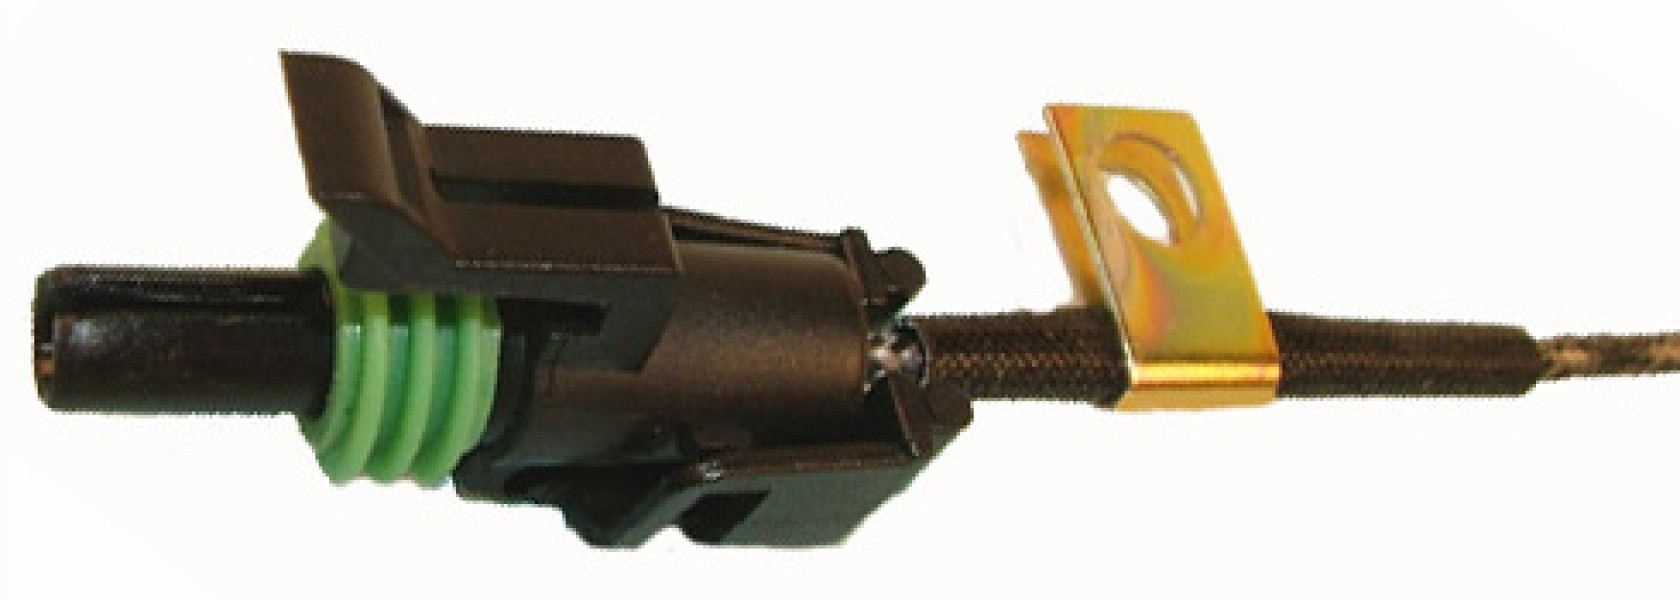 Image of A/C Compressor Clutch Connector from Sunair. Part number: PT-4008